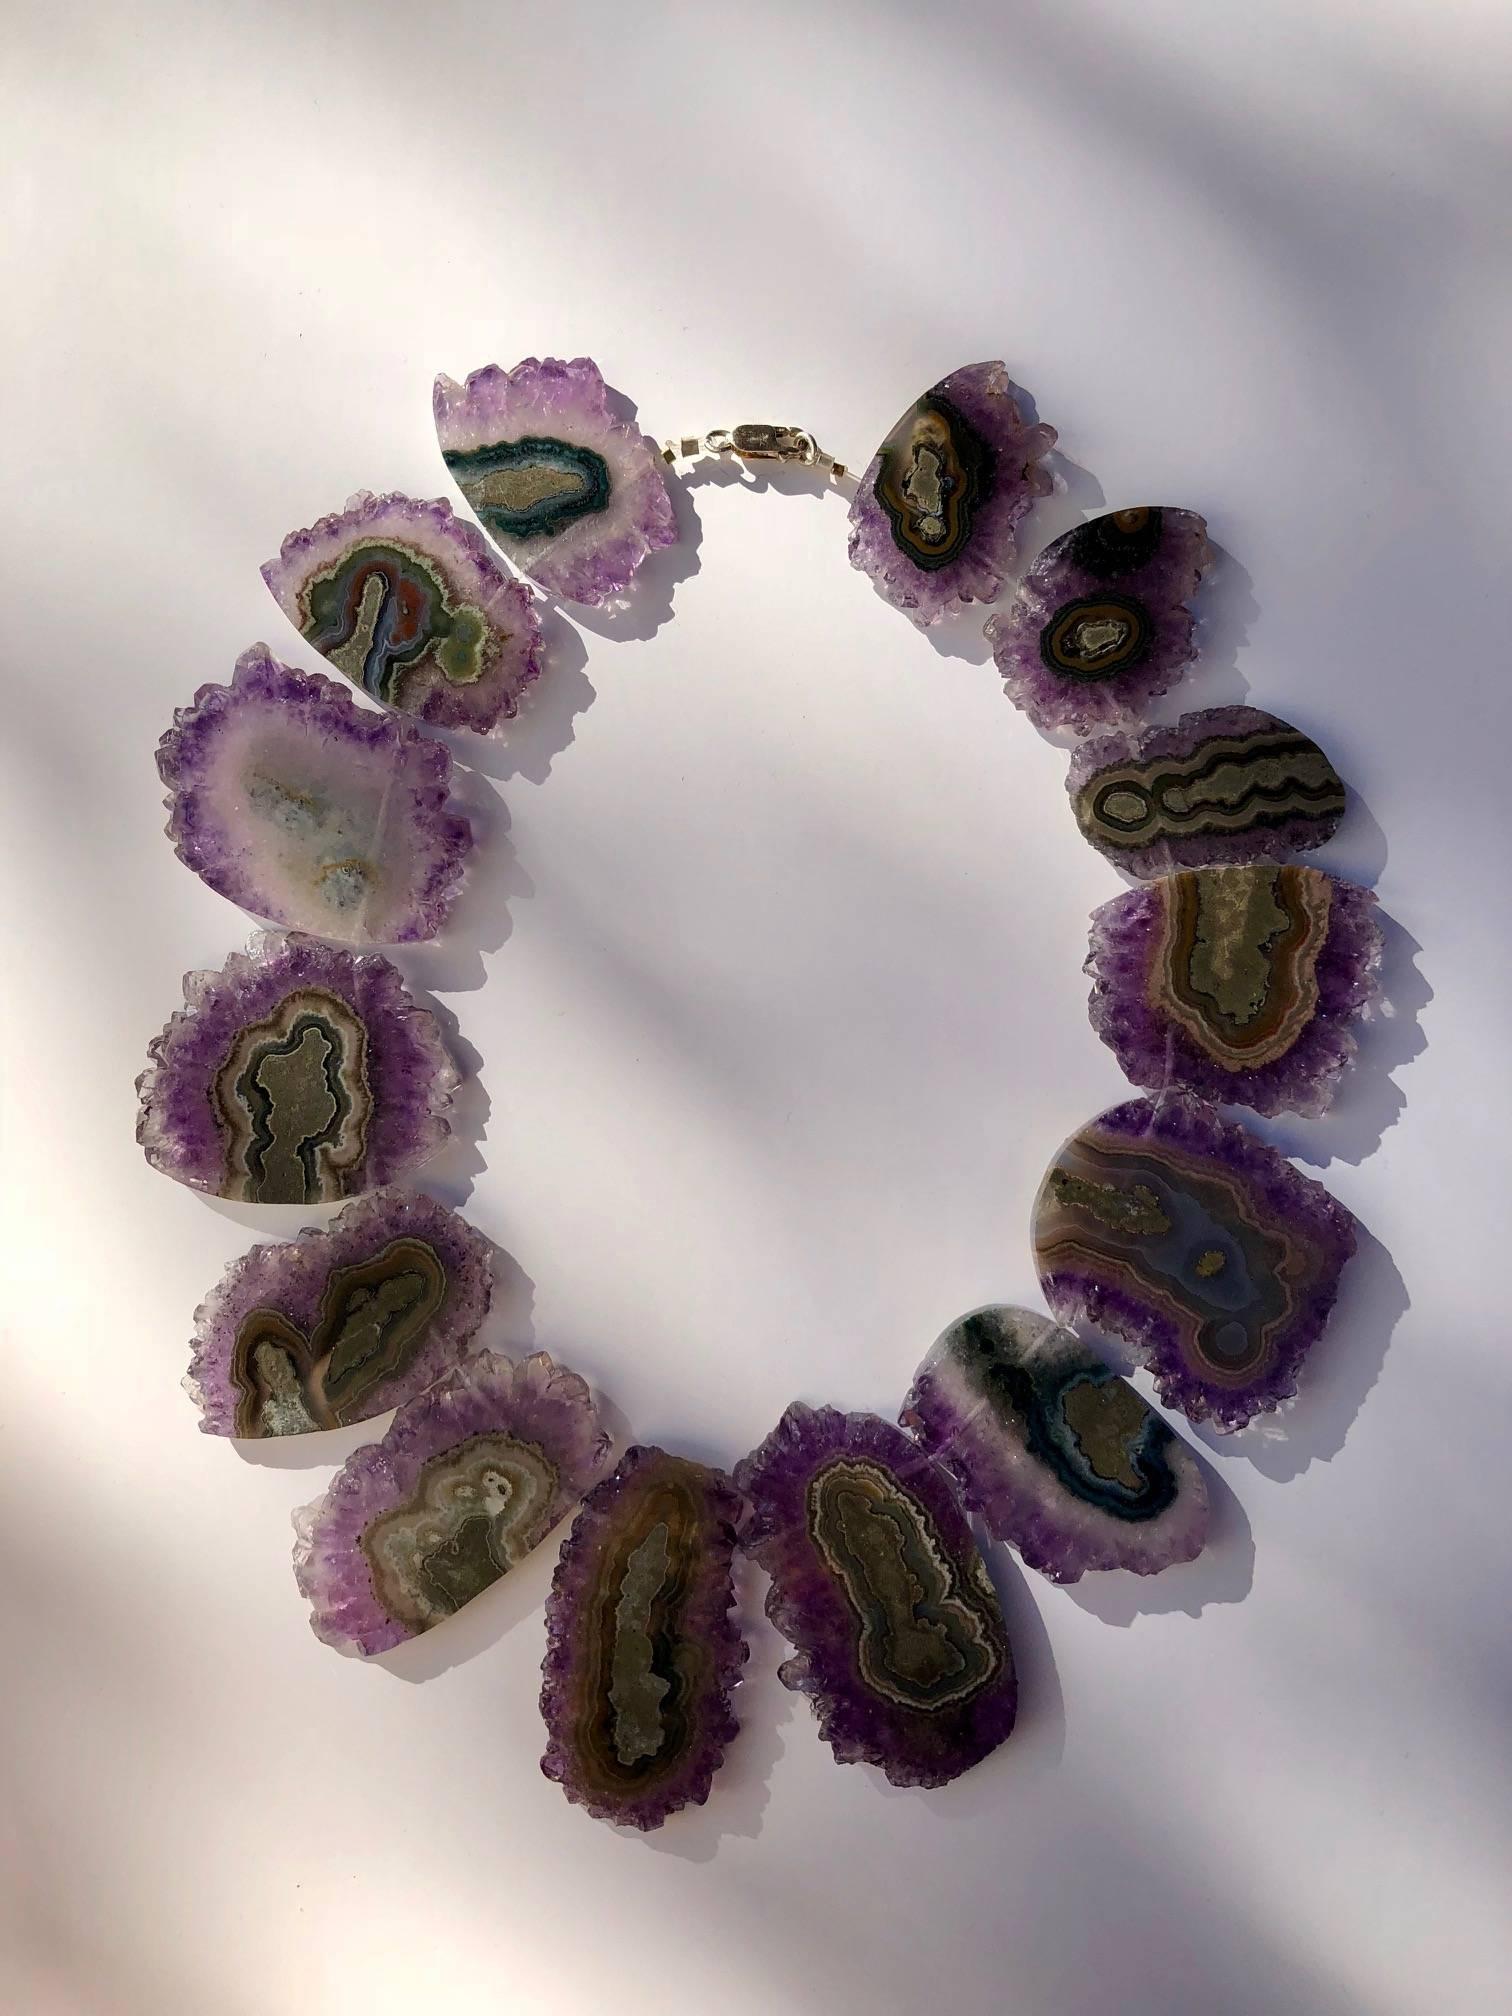 'A beautiful piece of art, that's what this is!'
Made of natural Amethyst, not colord, this necklace completes your outfit.
The selection is carefully made and the shape is amazing around your neck.